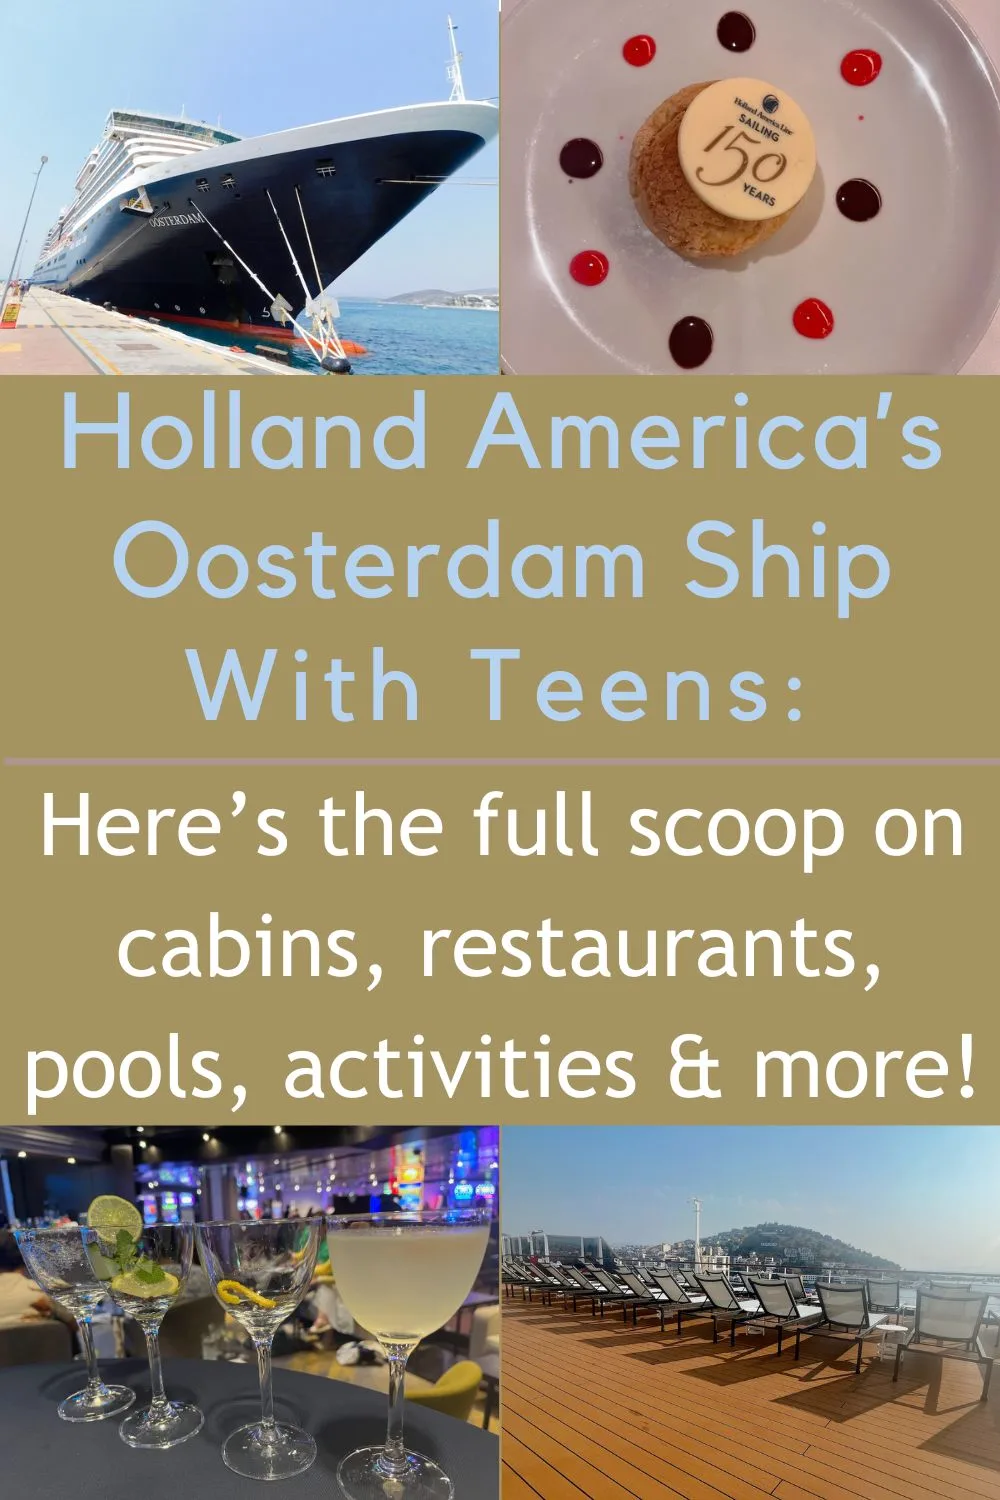 we sailed on the holland america oosterdam with a teen. here's the scoop on cabins, meals, activities, our mediterranean ports of call & more (review).